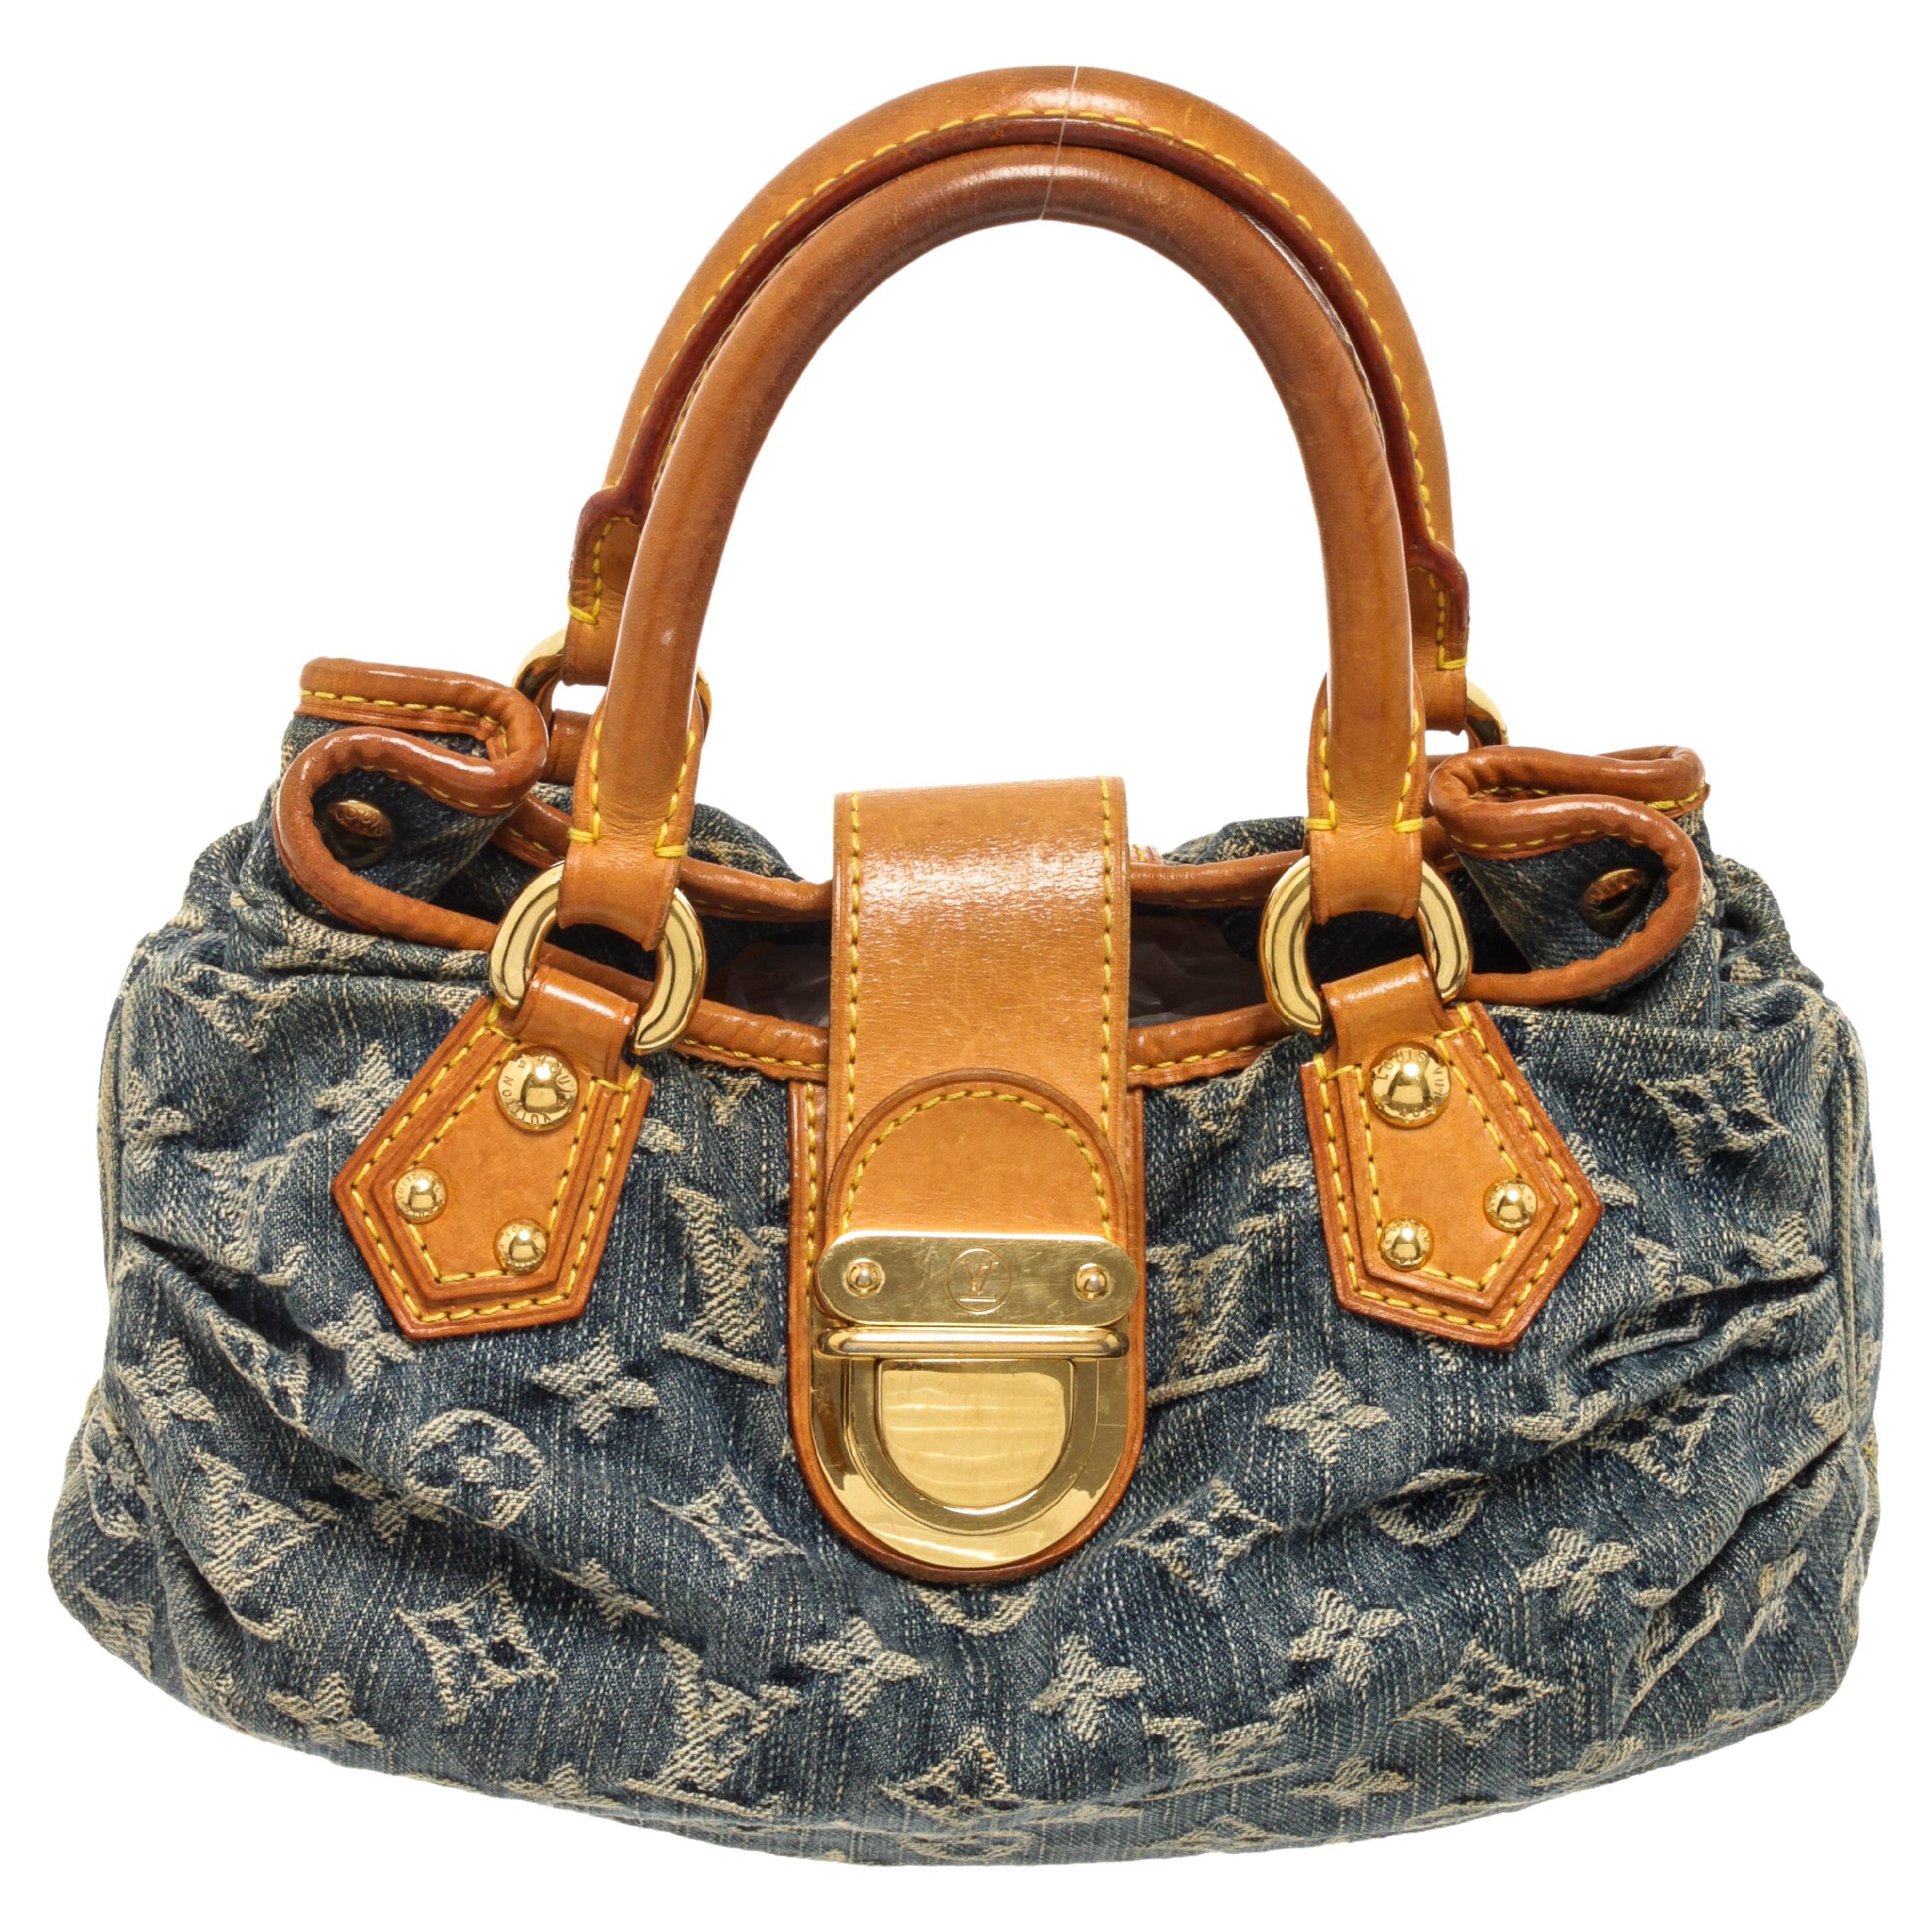 Louis Vuitton - Authenticated Pleaty Handbag - Denim - Jeans Blue for Women, Never Worn, with Tag